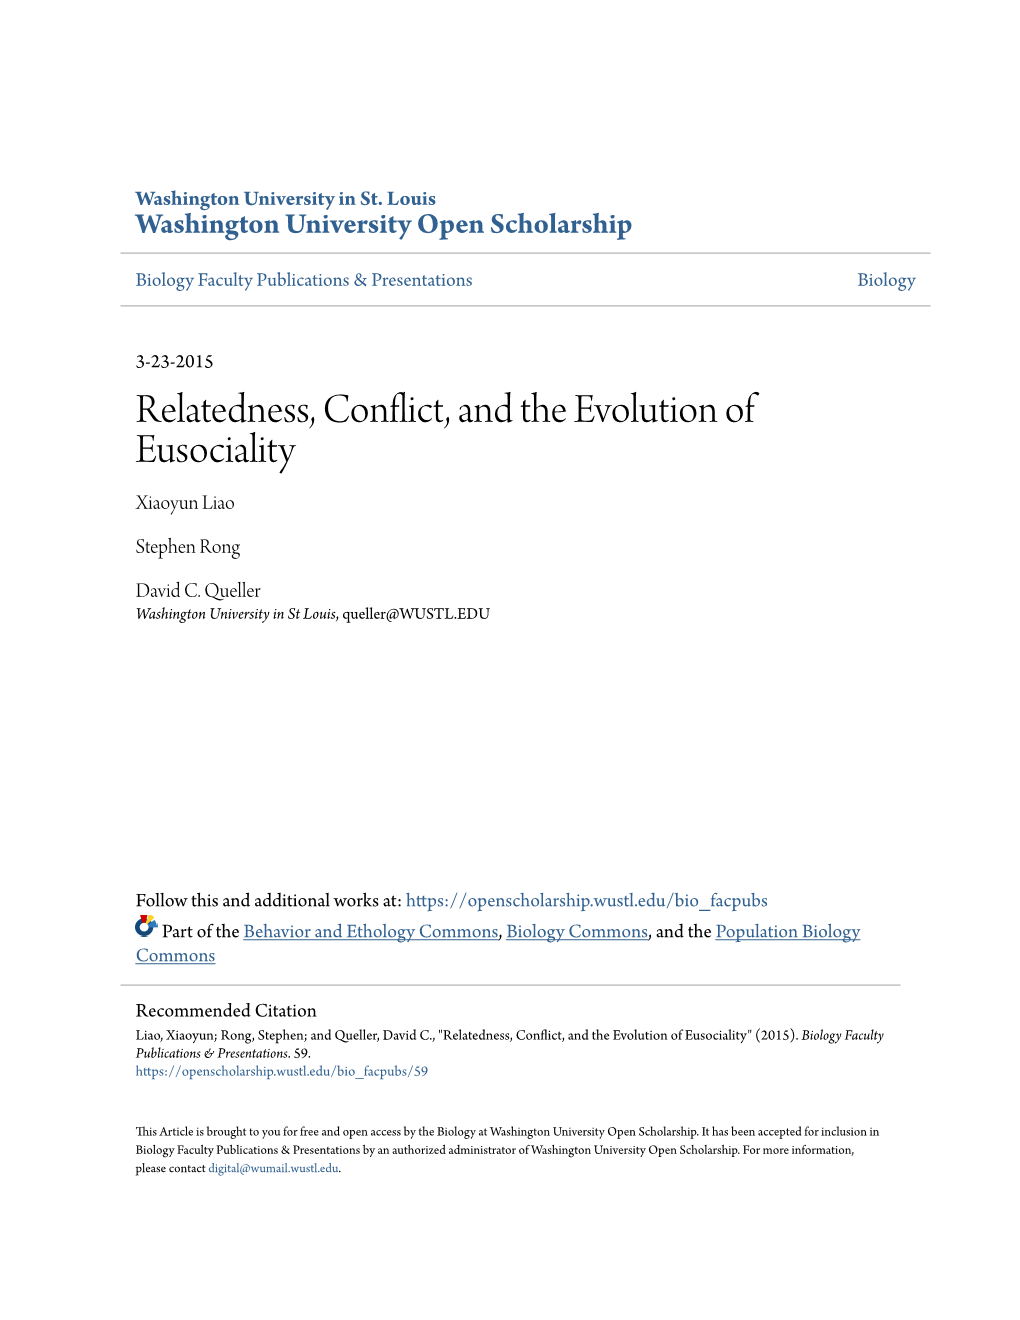 Relatedness, Conflict, and the Evolution of Eusociality Xiaoyun Liao